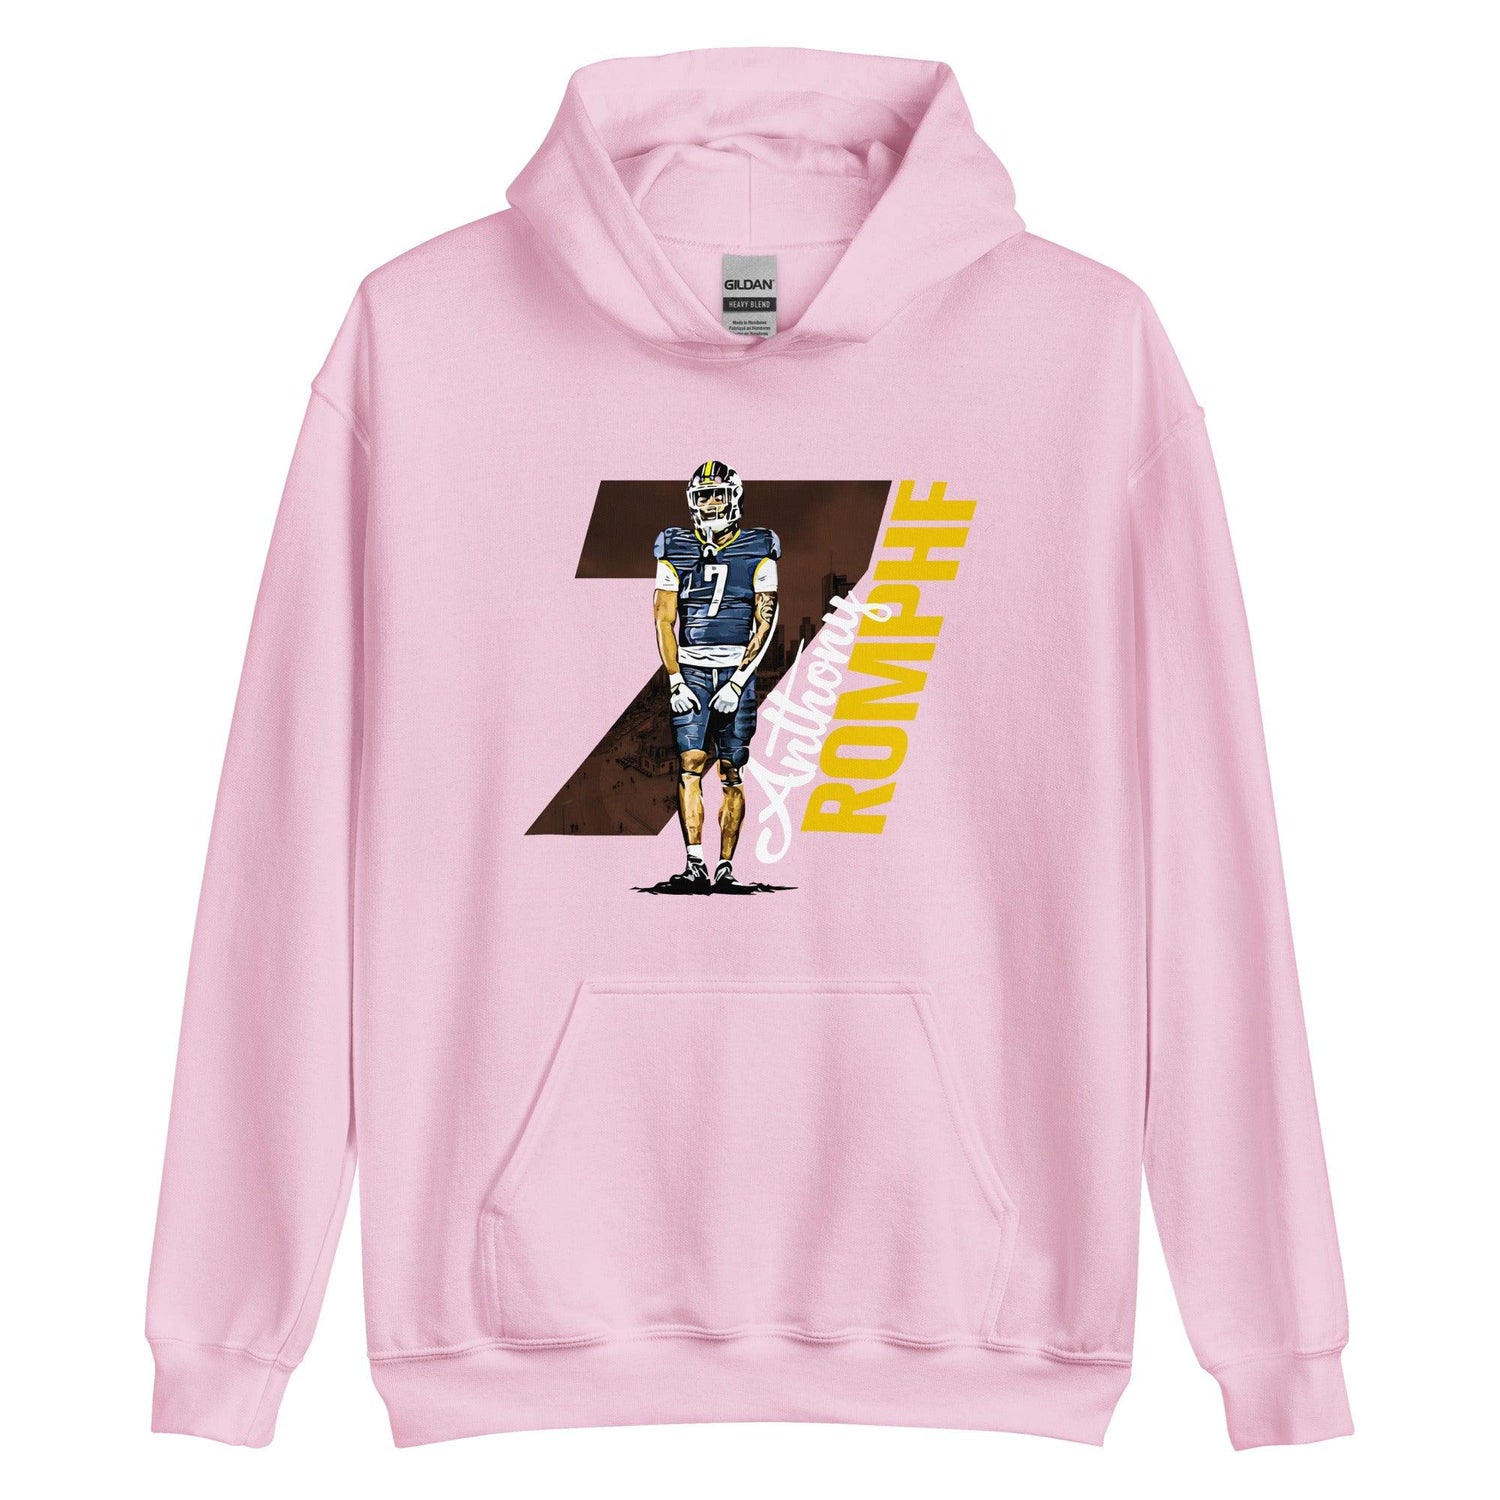 Anthony Romphf "Gameday" Hoodie - Fan Arch